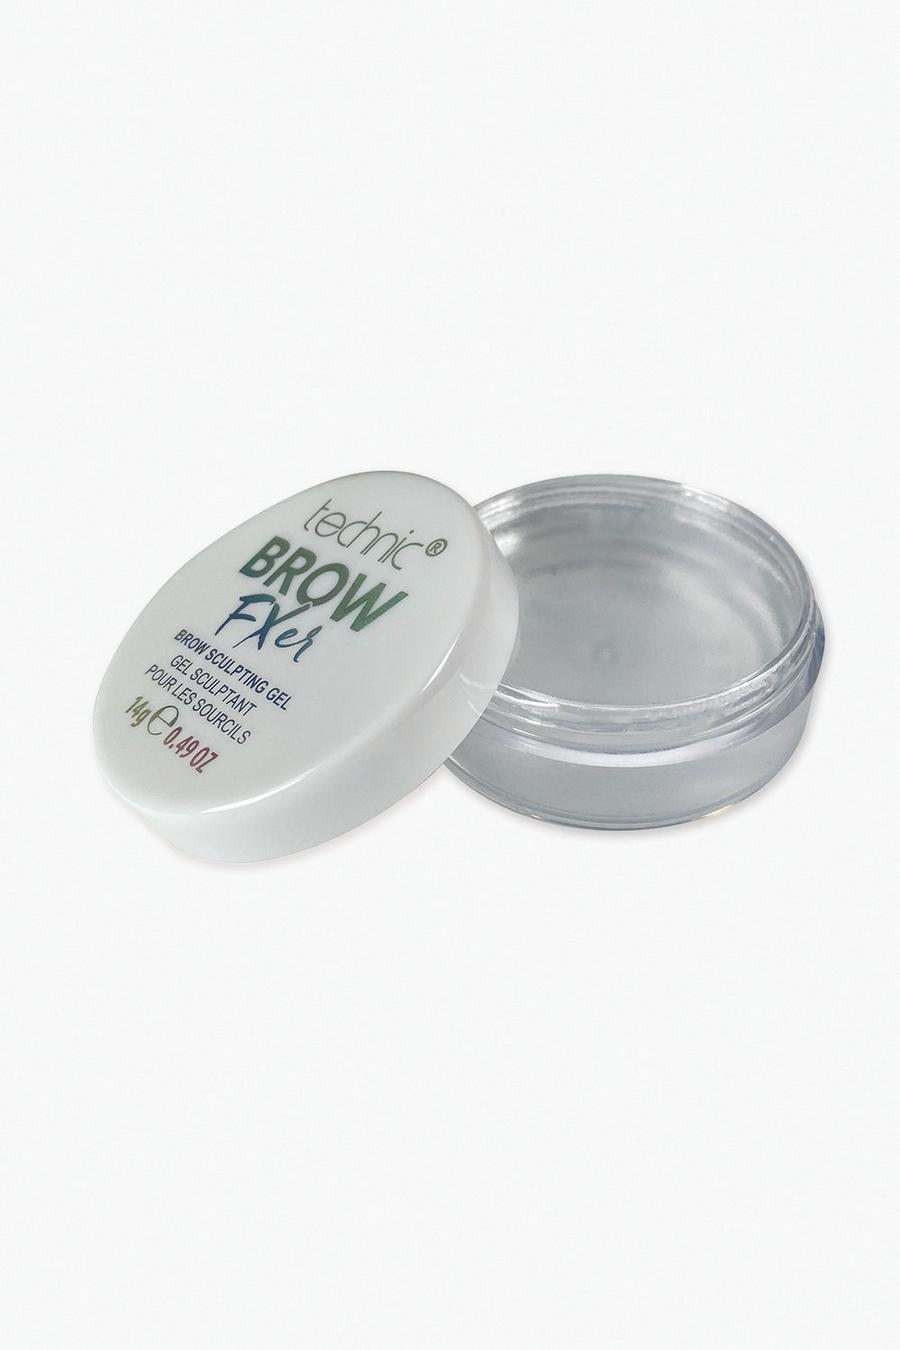 Clear Technic Brow Fxer